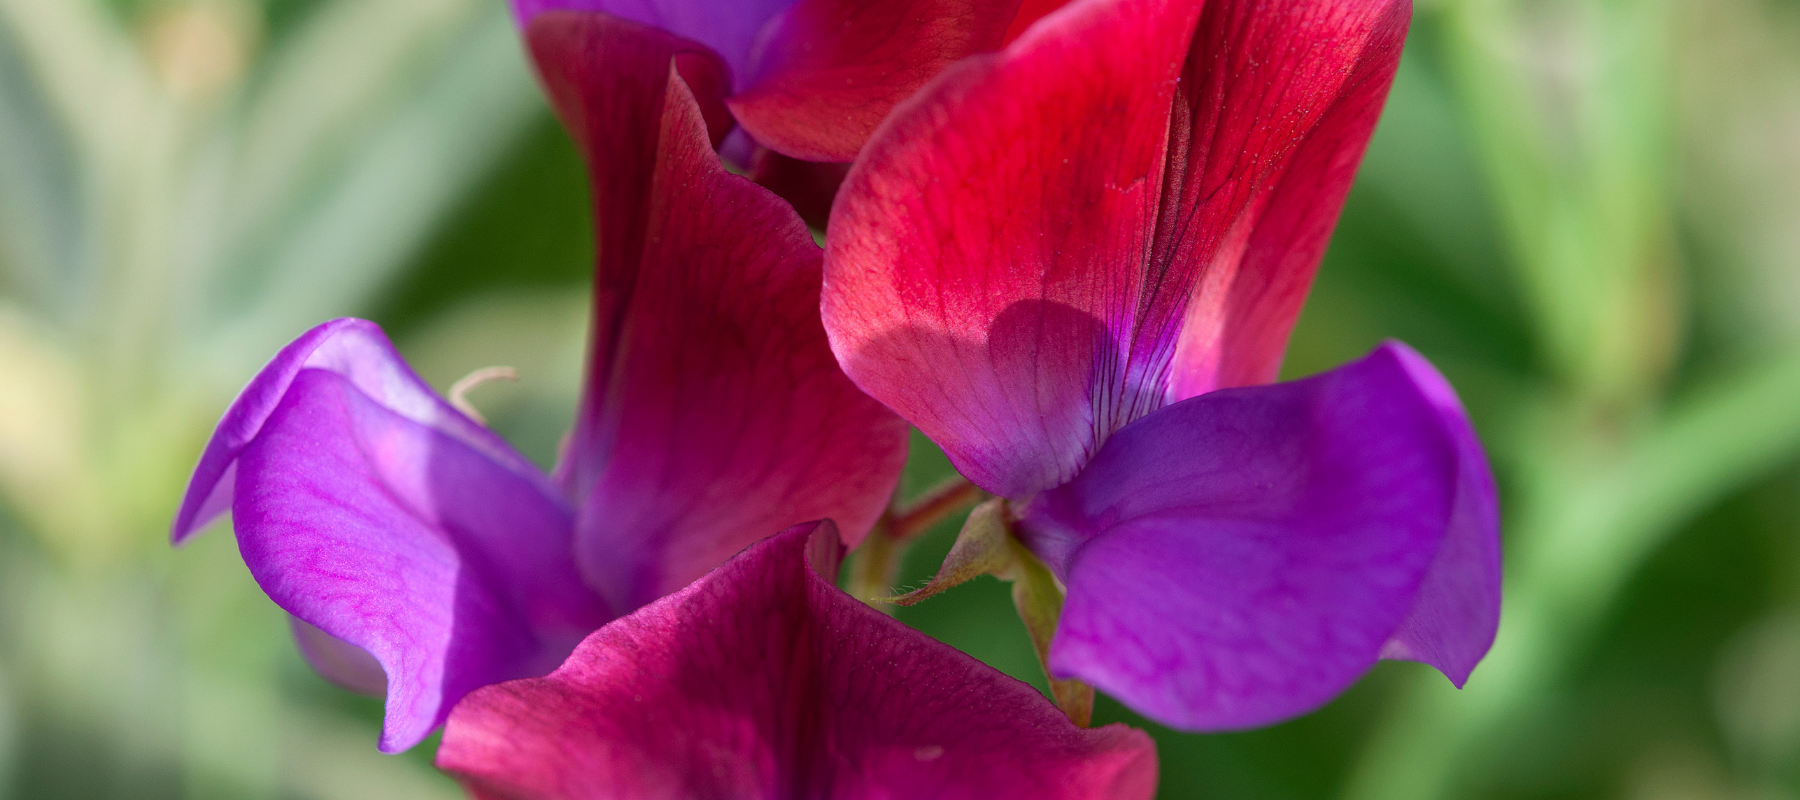 Early history and breeding of sweet peas